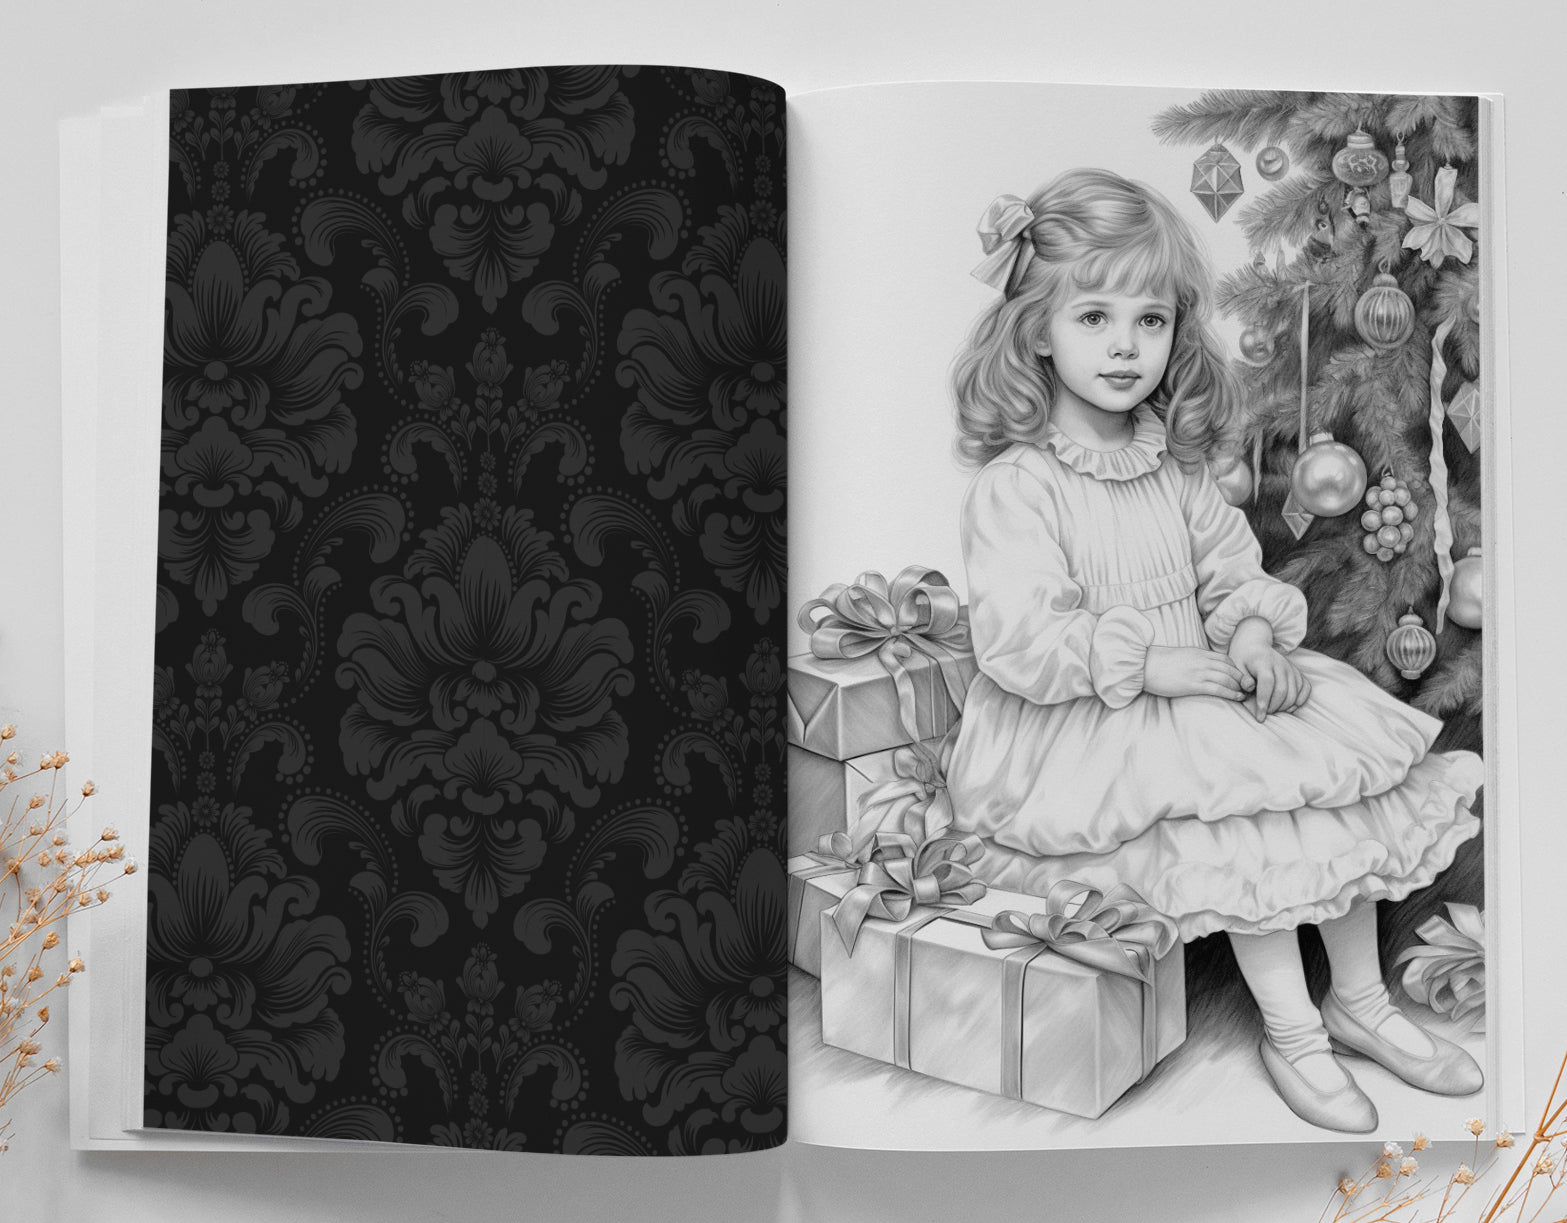 Victorian Christmas Coloring Book Grayscale (Printbook) - Monsoon Publishing USA